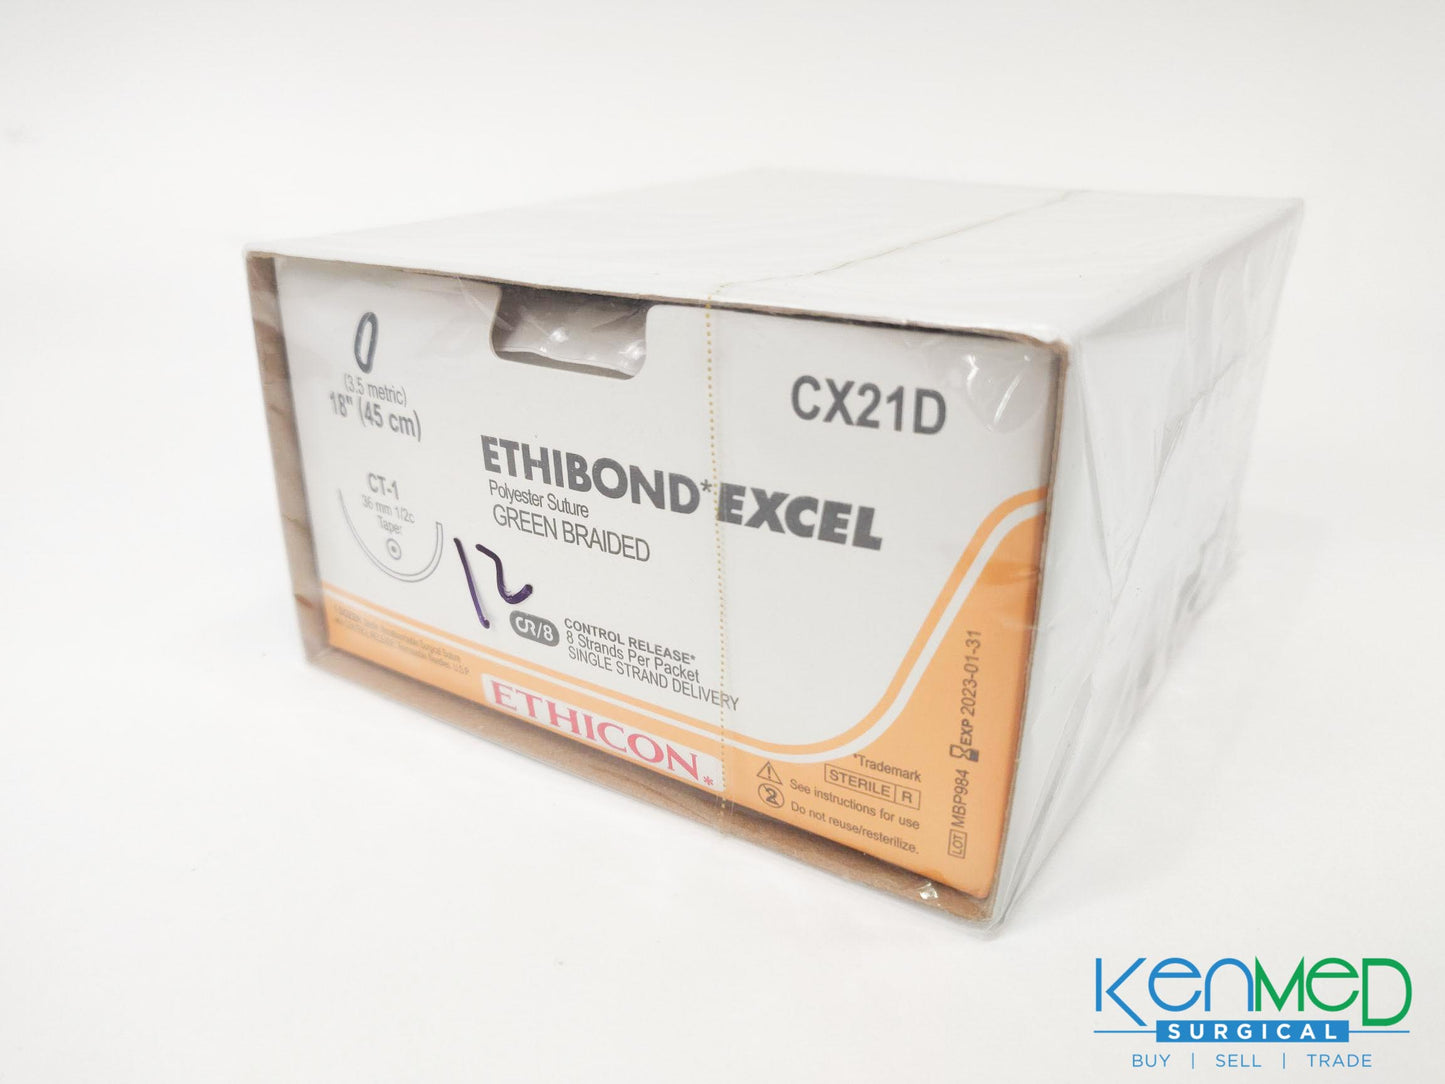 Ethicon CX21D Ethibond Excel Polyester Suture Green Braided (EXP 01-31-2023)